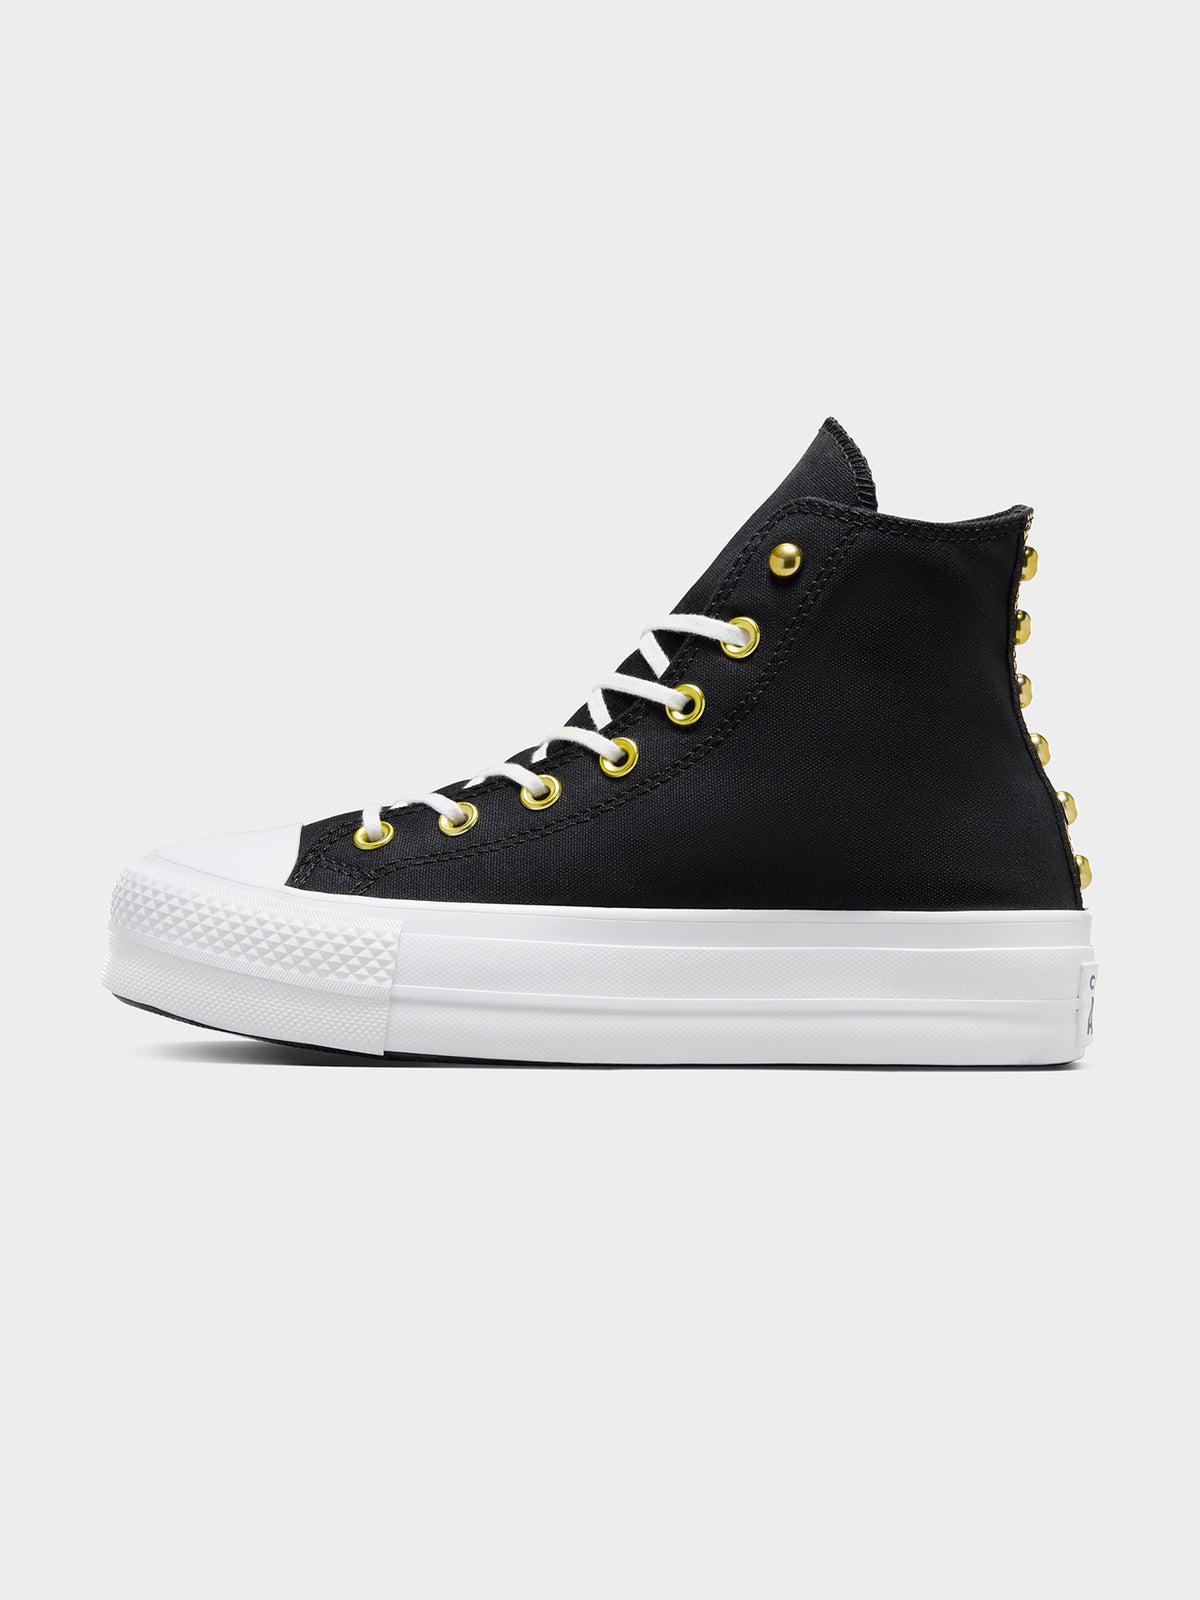 Womens Chuck Taylor All Star Lift Star Studded High Top Sneakers in Black &amp; White